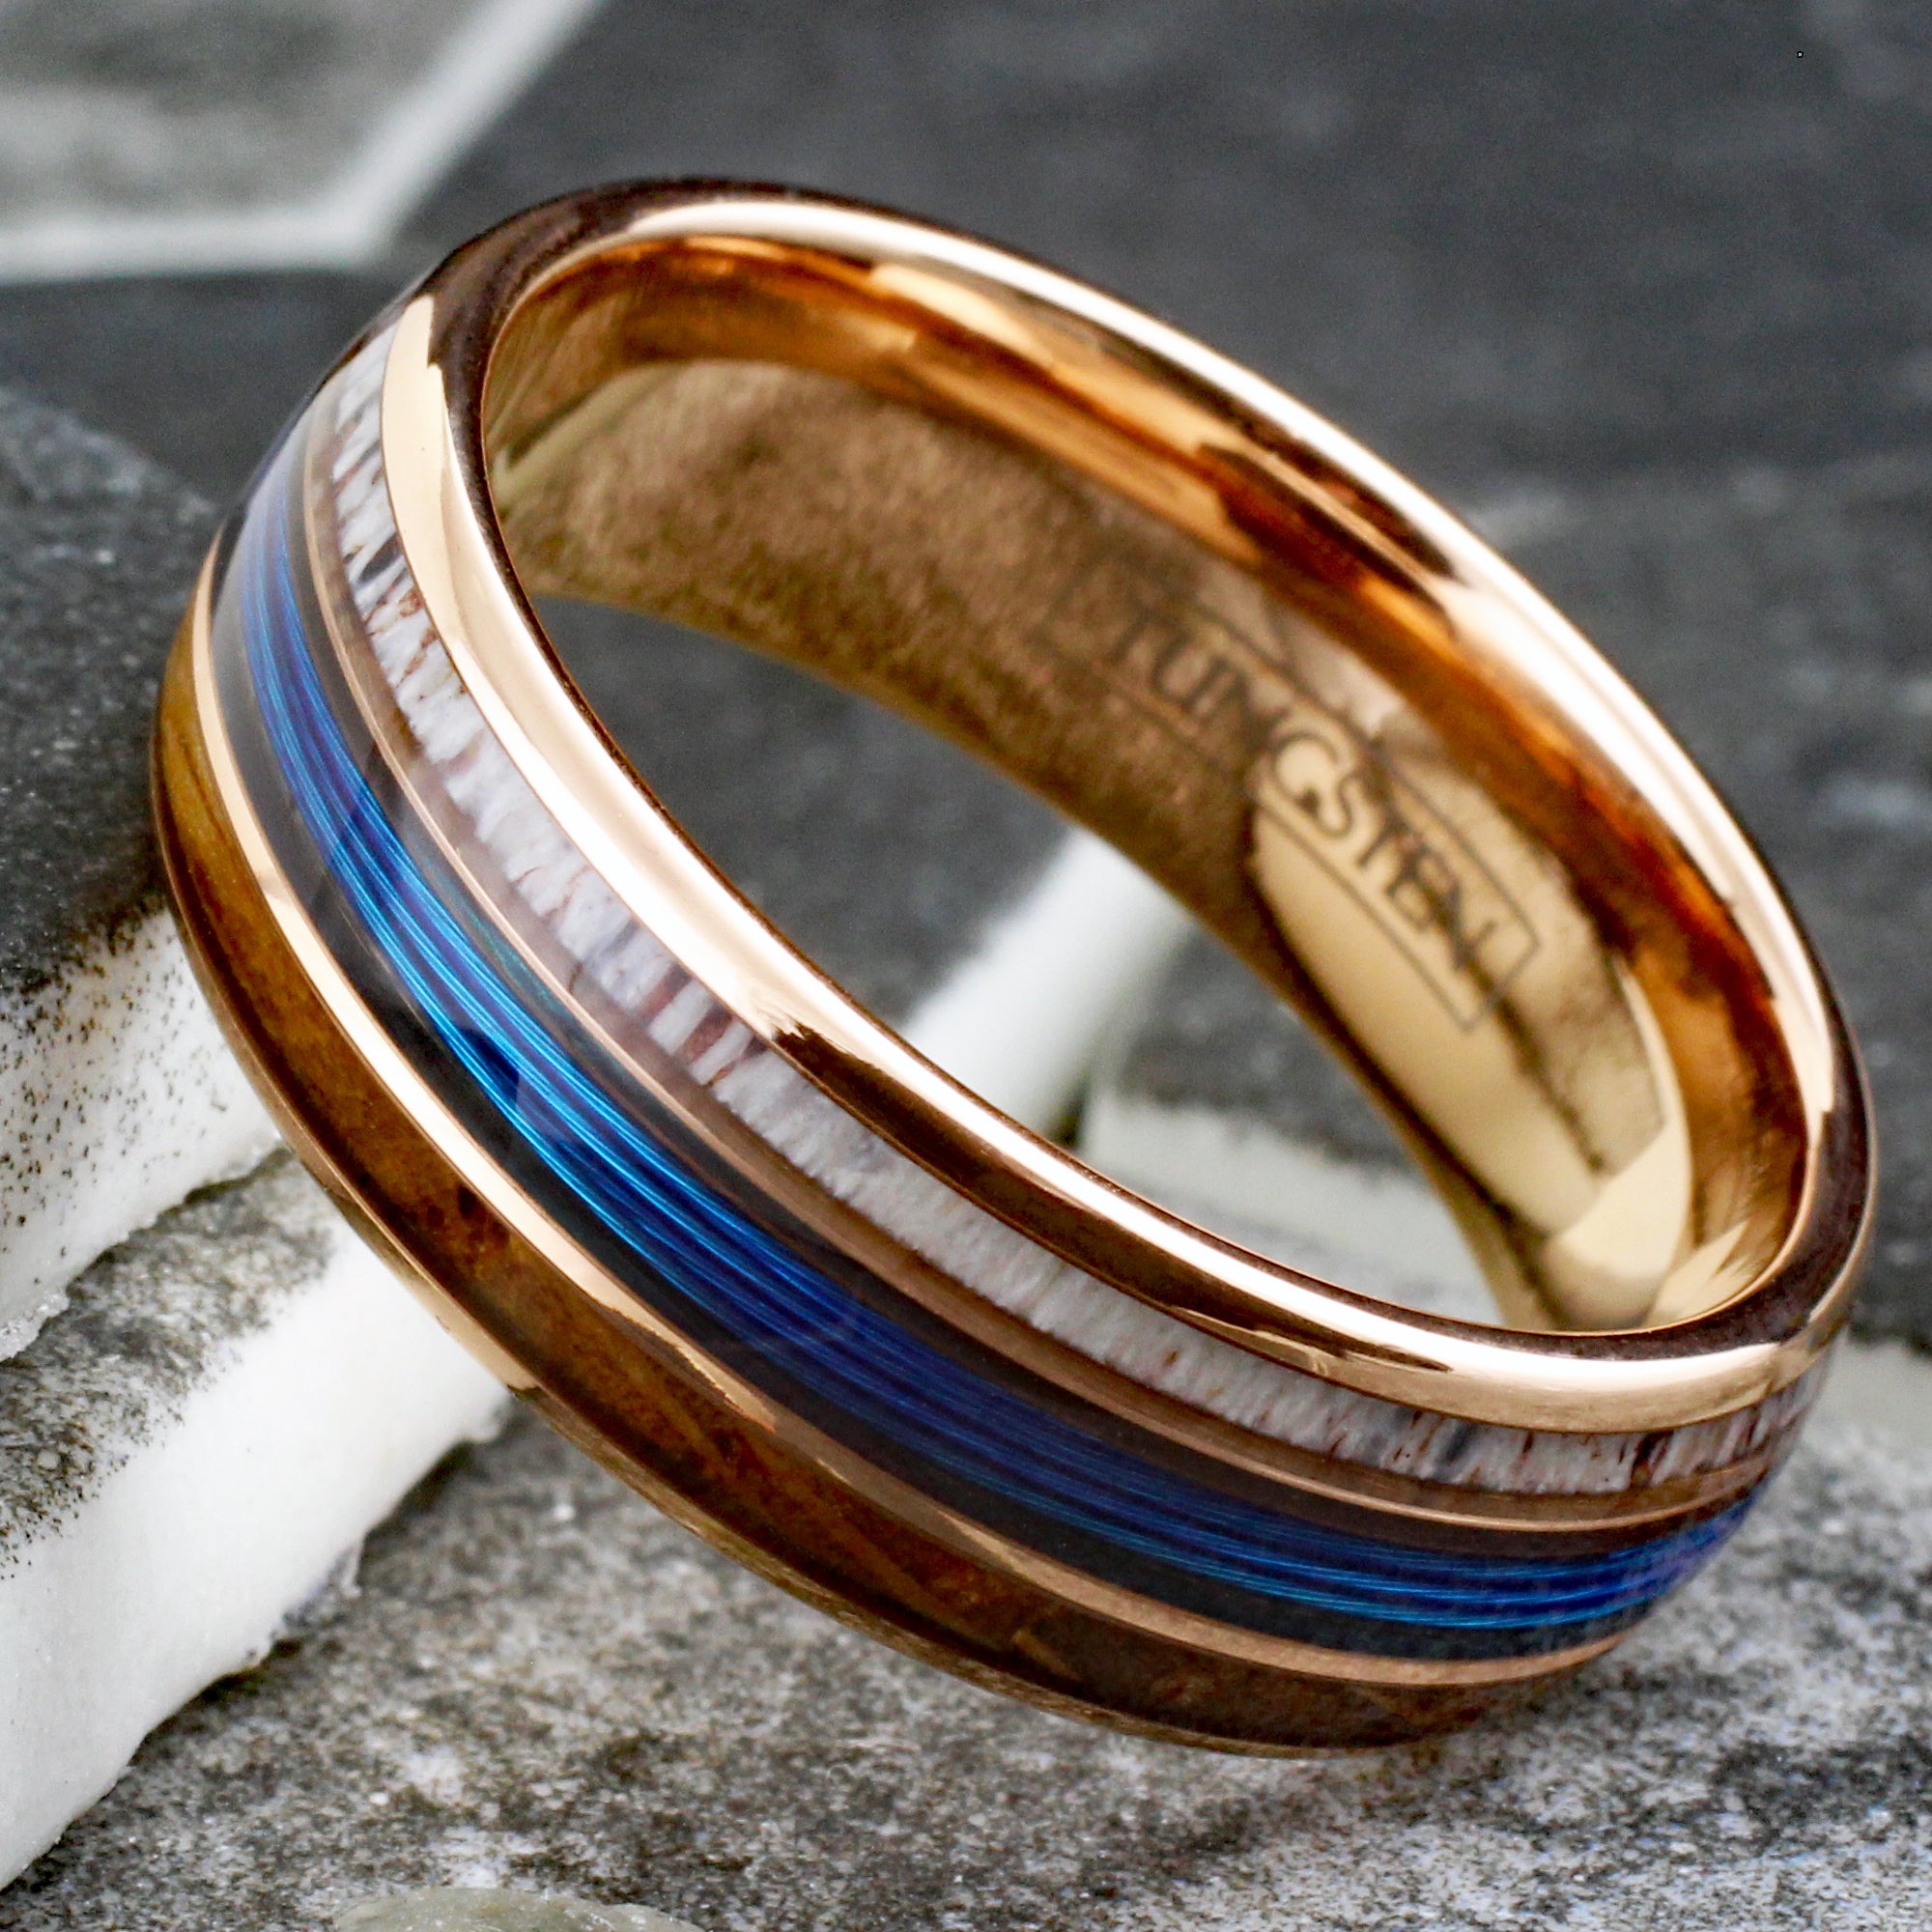 Gorgeous Polished Rose Gold Tungsten Low Dome Ring with BLUE Real Fishing  Line Between Whiskey Barrel Oak Wood and Deer Antler Inlays.